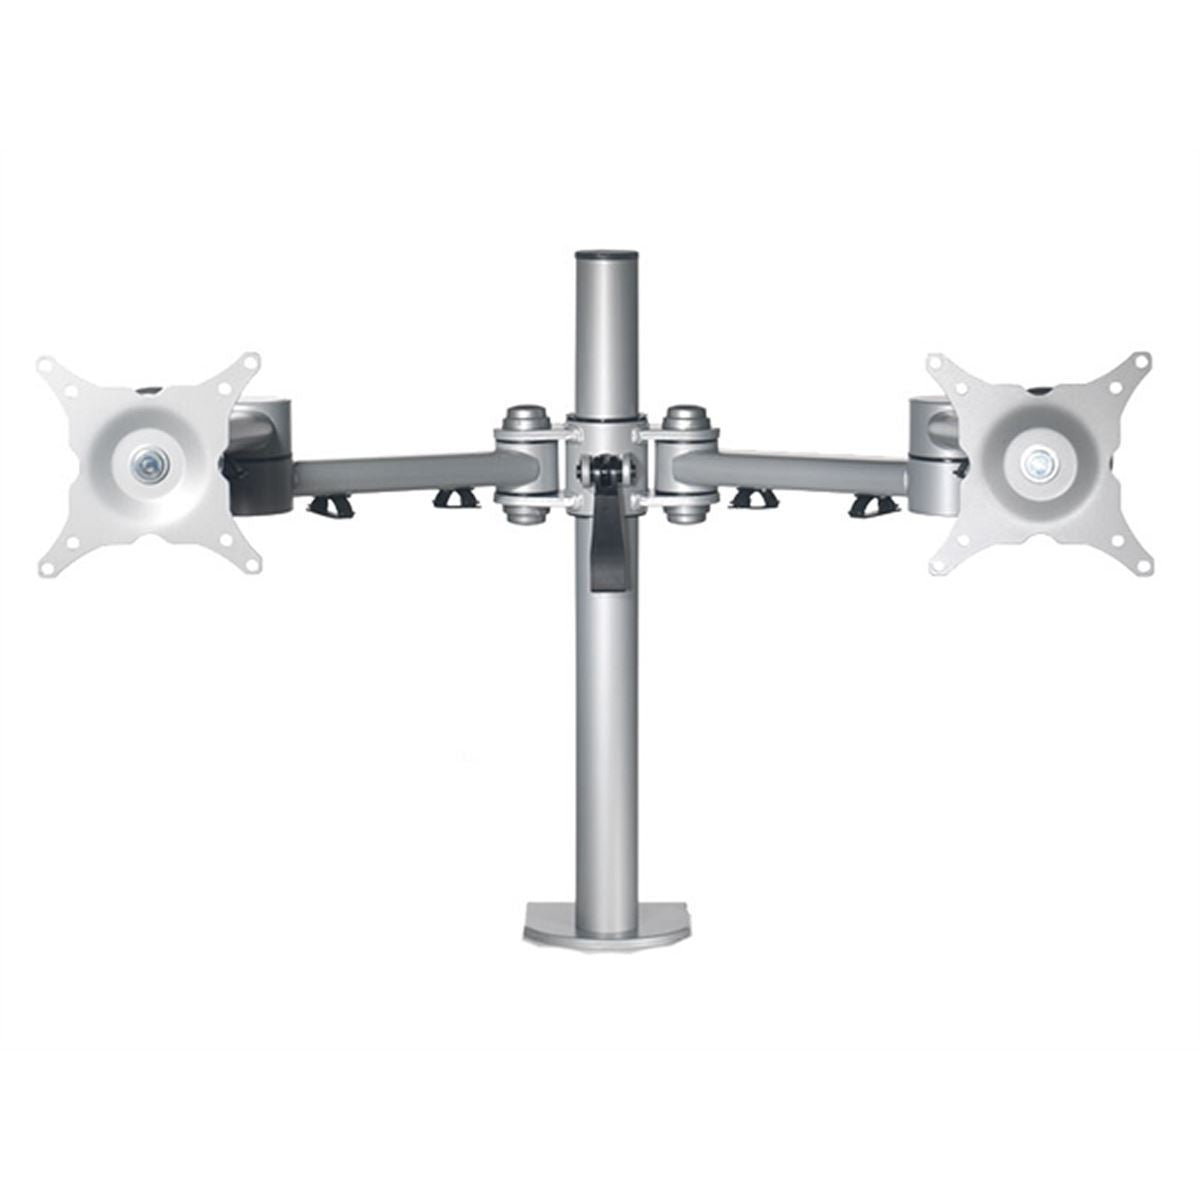 Vision Desk Mounted Pole Monitor Arm